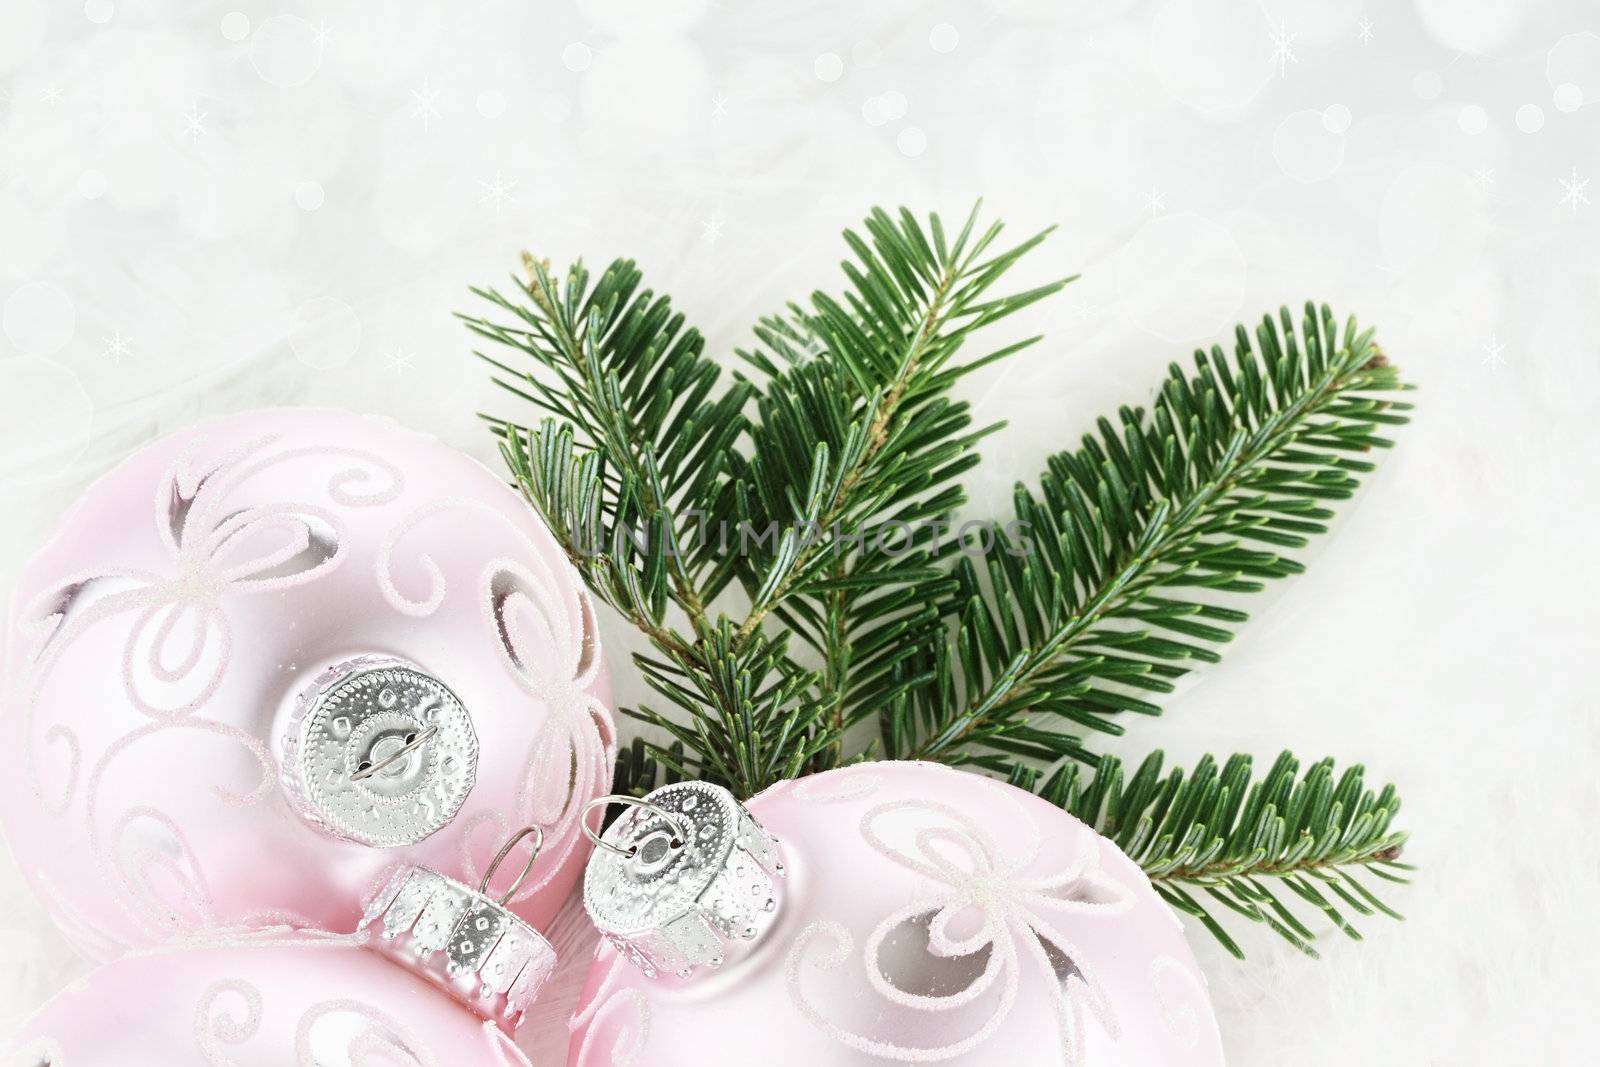 New pink Christmas baubles border with fresh pine over a white sparkly background. 